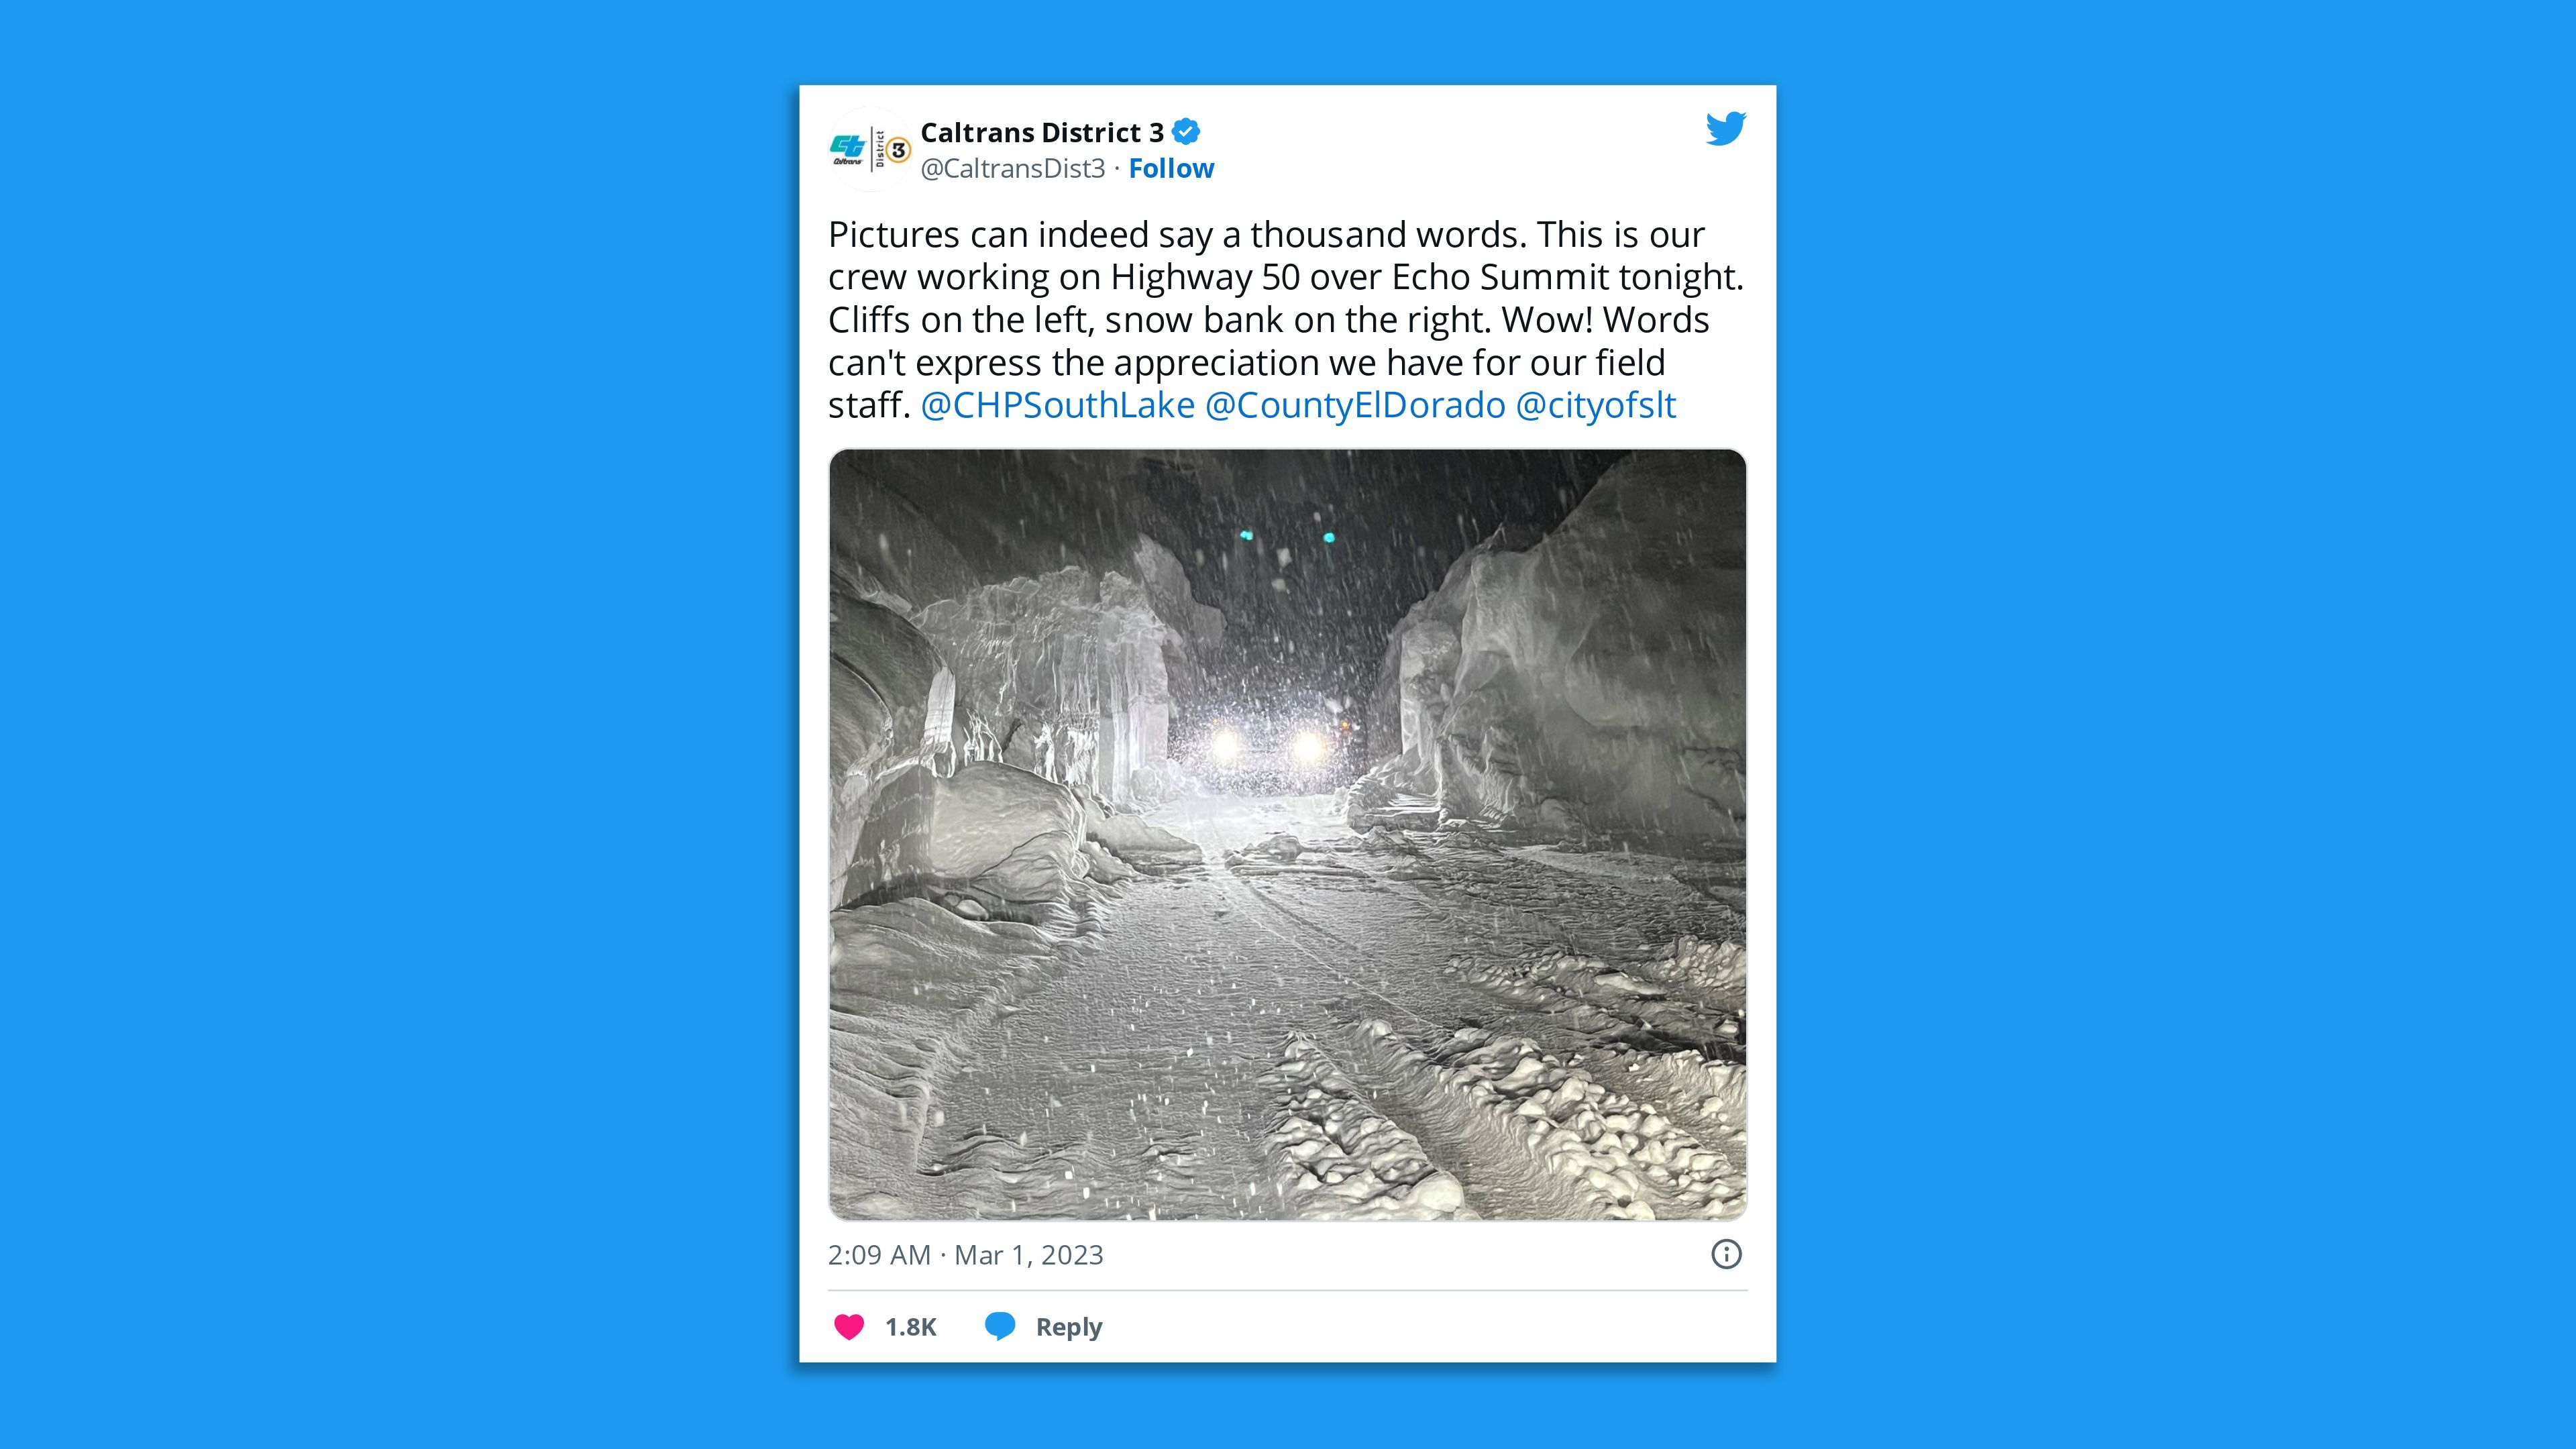 A Cal Trans tweet stating, "his is our crew working on Highway 50 over Echo Summit tonight. Cliffs on the left, snow bank on the right."